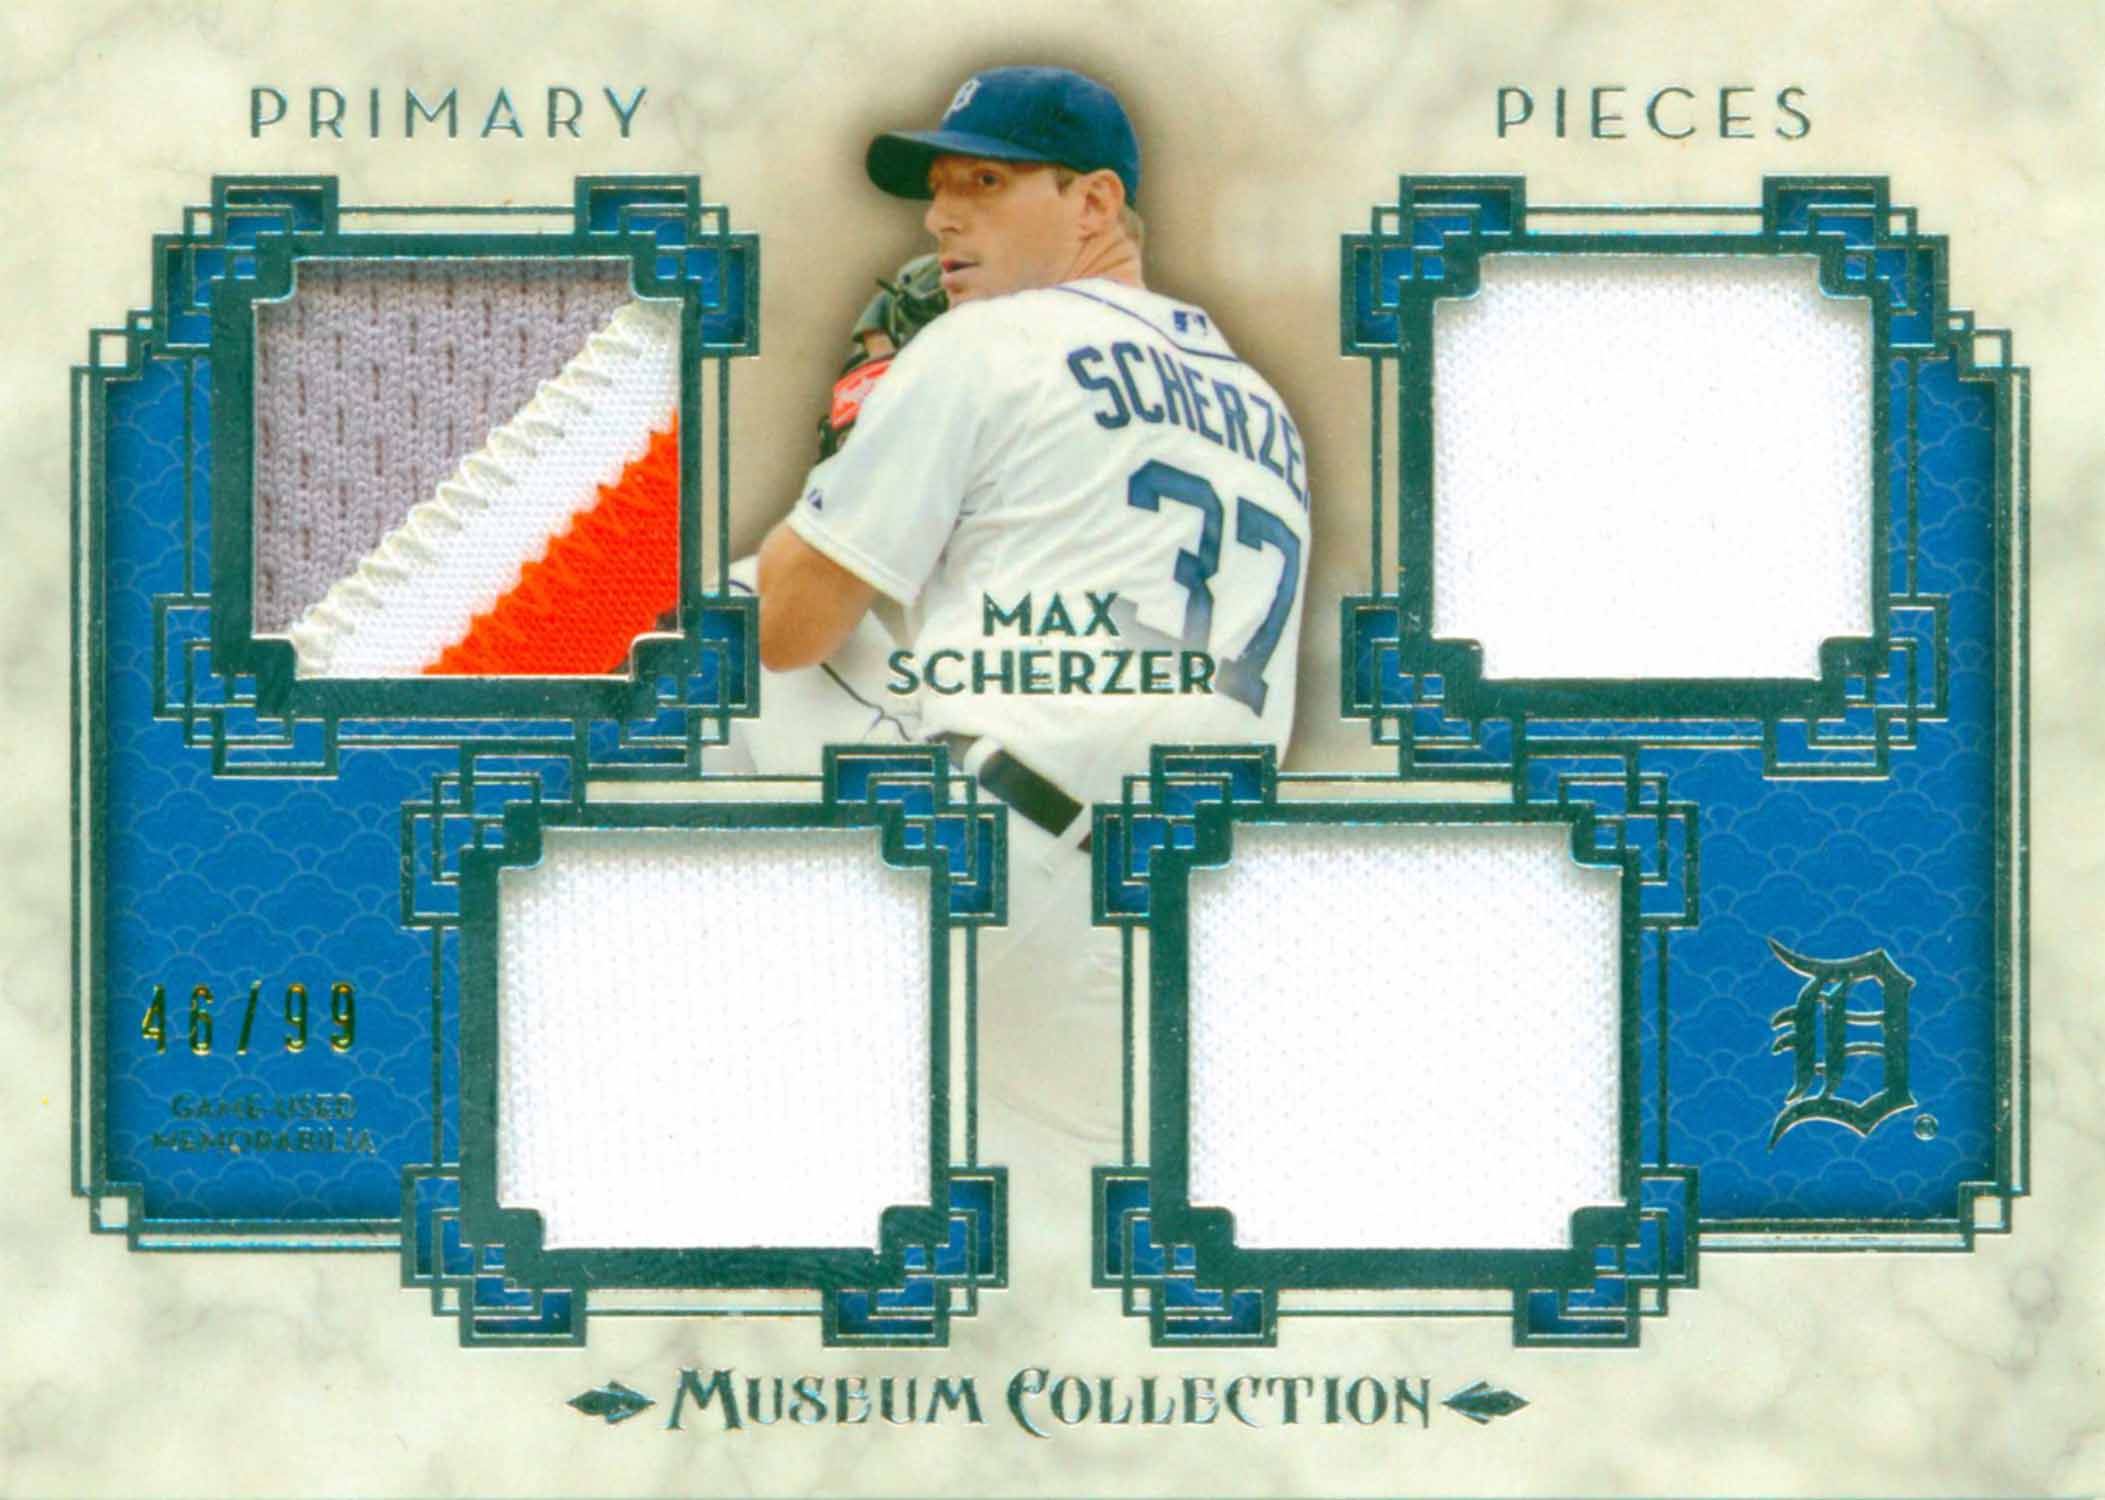 2014 Topps Museum Collection Primary Pieces Quad Relics